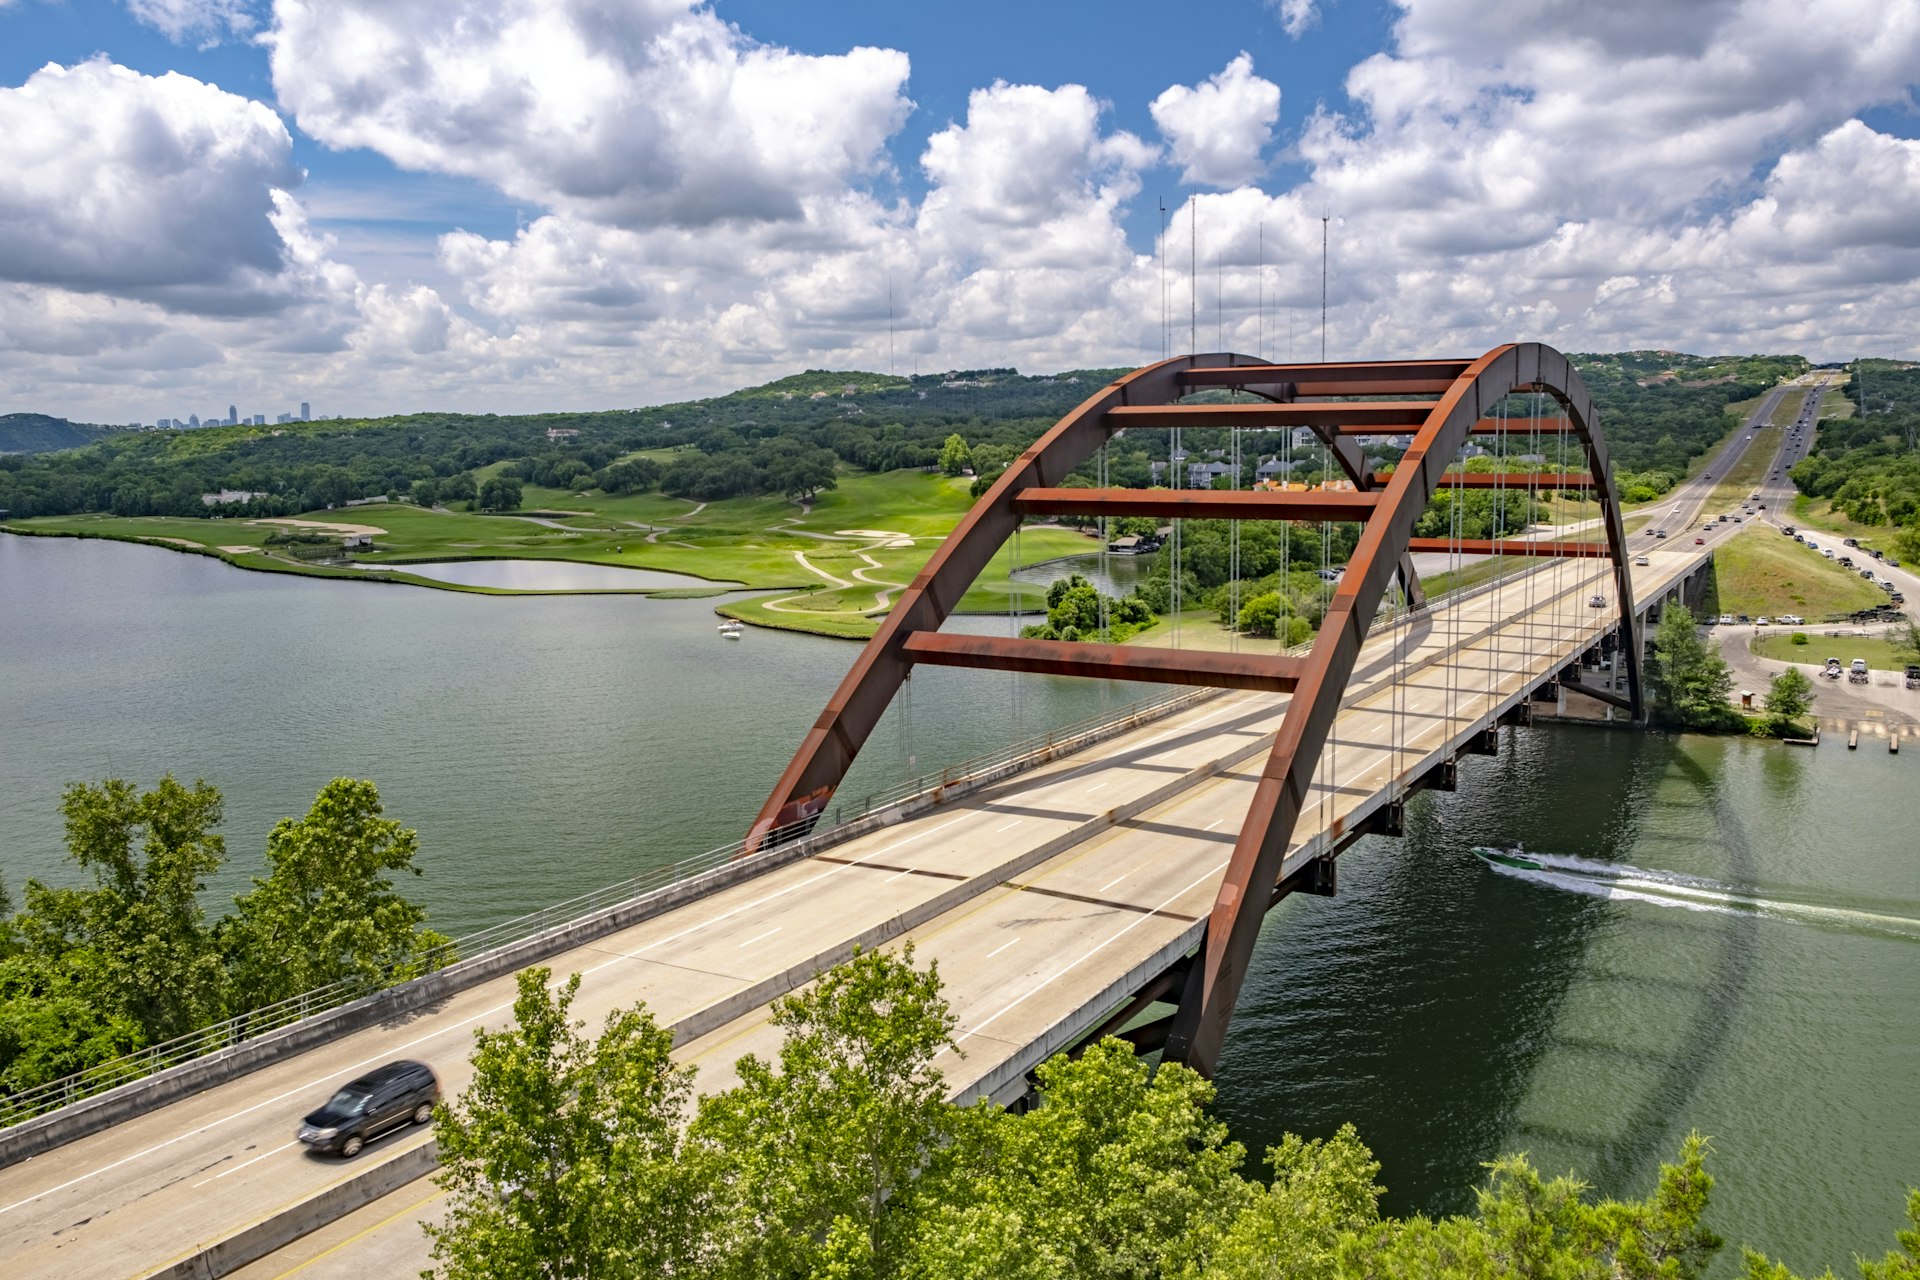 A car drives over the Pennybacker 360 bridge on the outskirts of Austin, Texas. Beyond the bridge, which spans a river, a number of Austin's skyscrapers are visible.